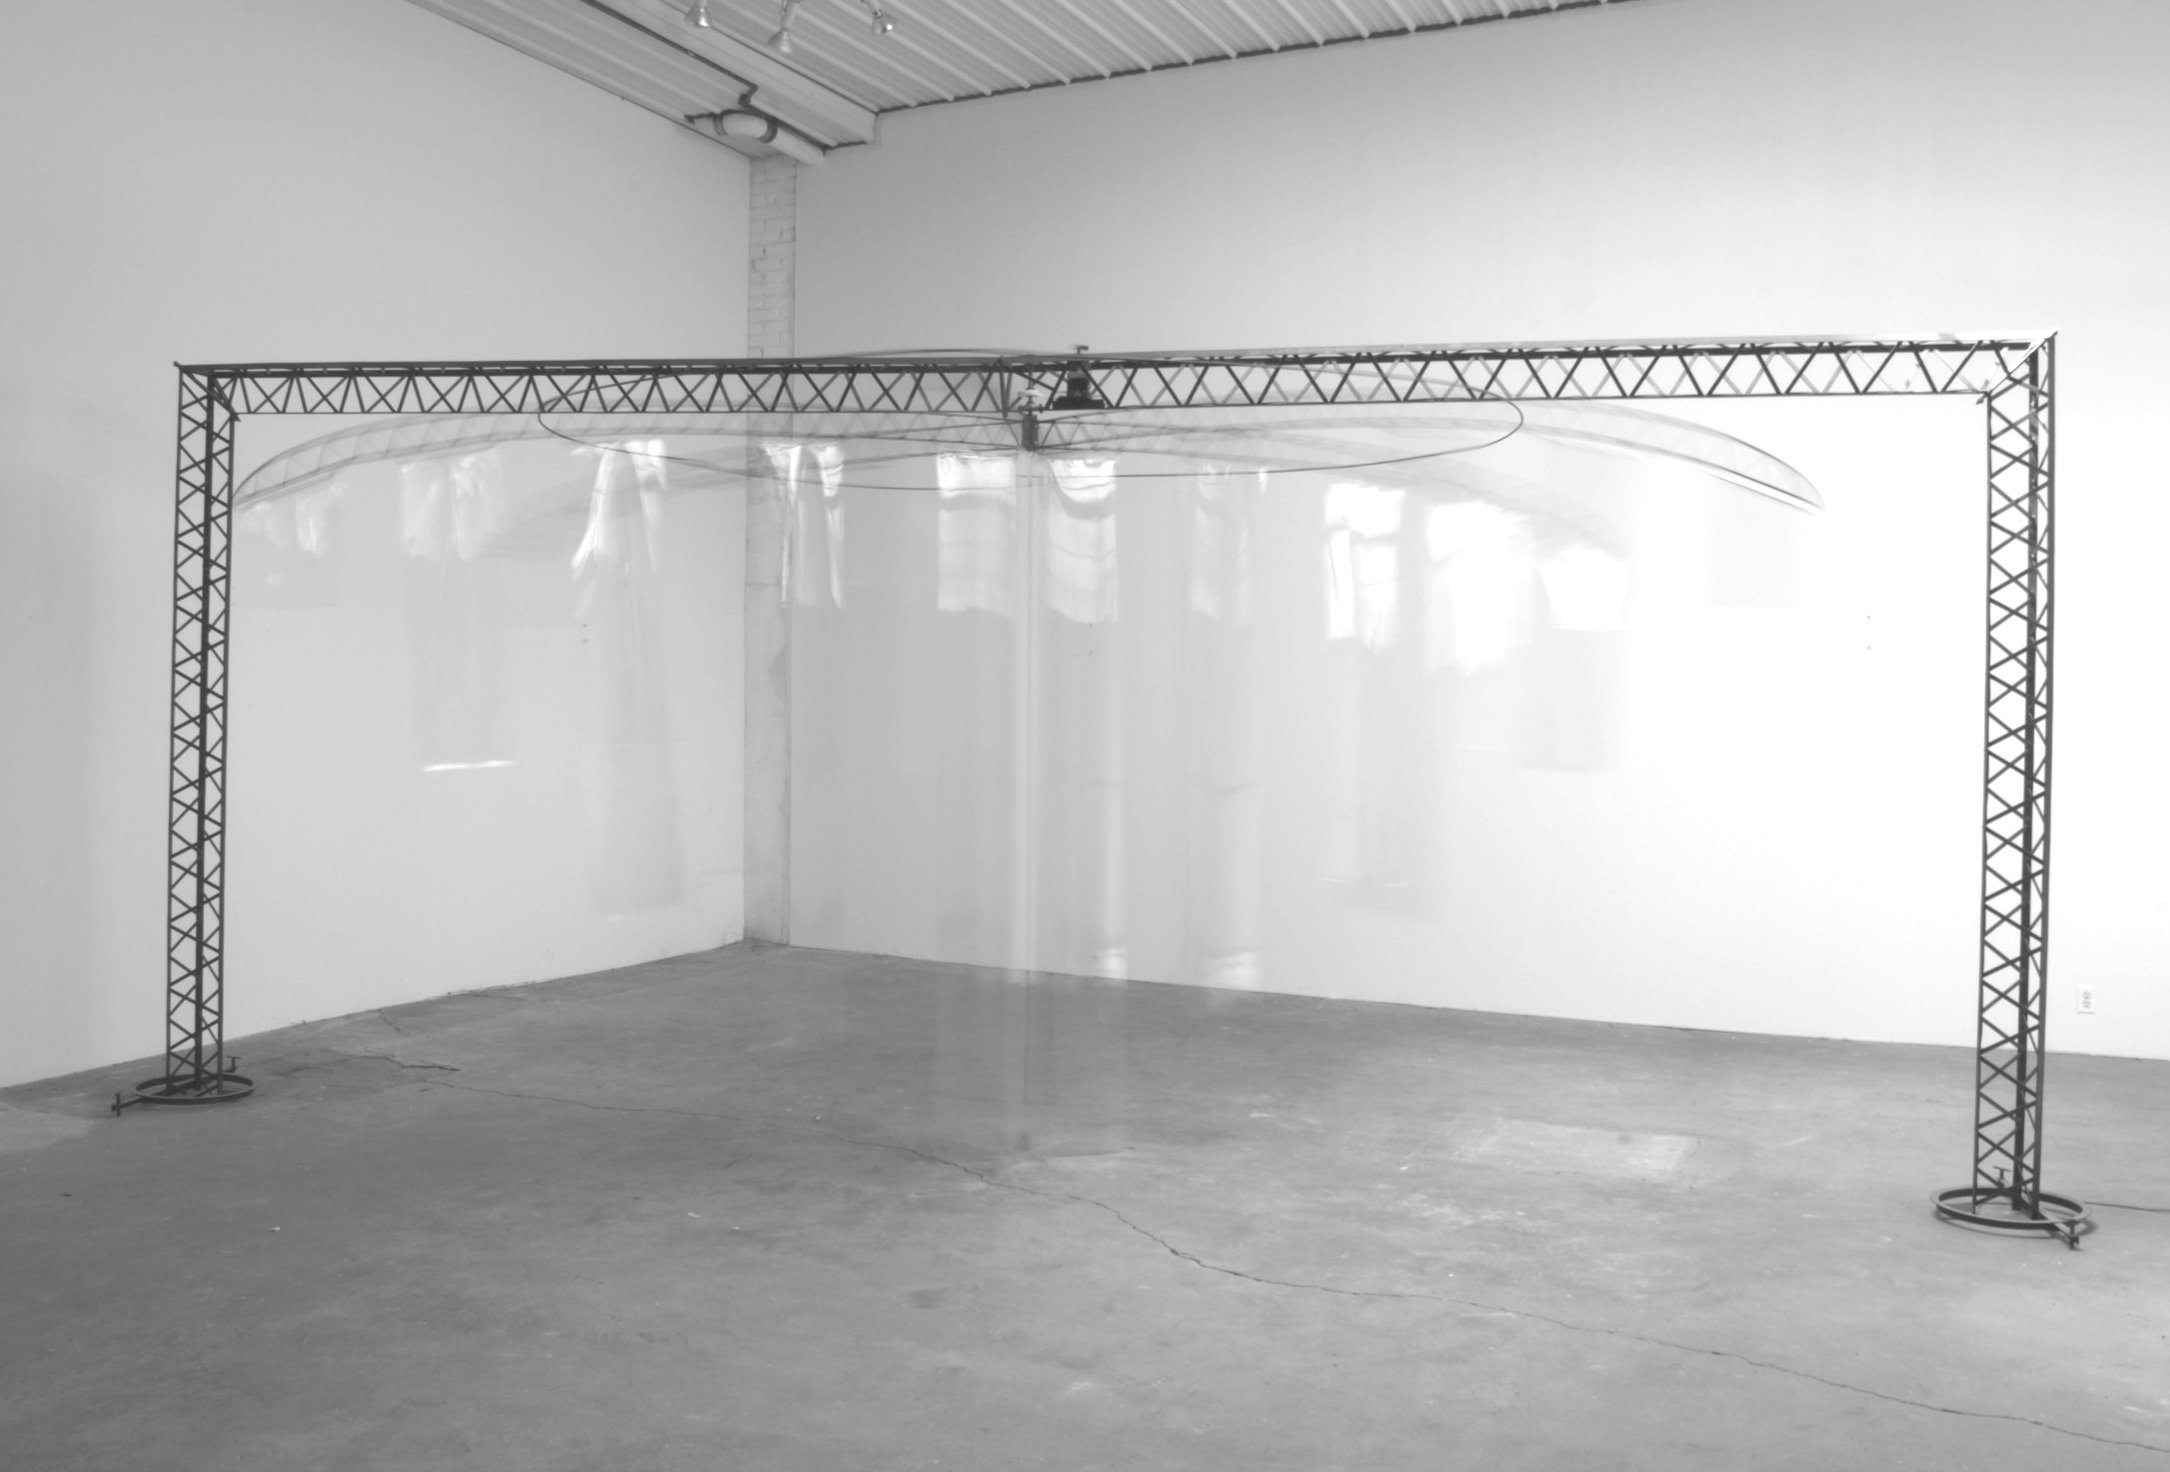  Watching (2014), 24’l 12’w x 12’h, steel with motor, vinyl, foot pedal and timer, freestanding kinetic sculpture 